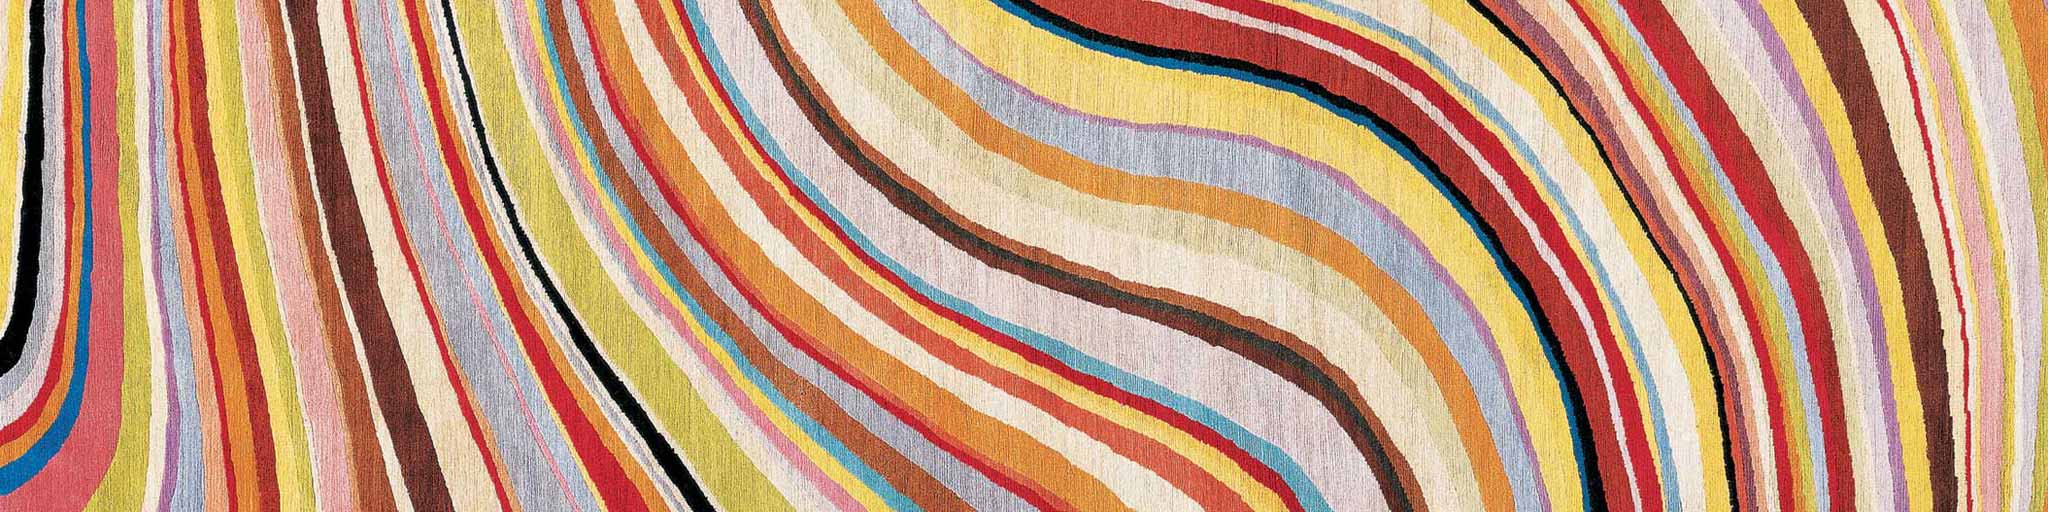 I want a Knockoff! | Paul Smith Rug